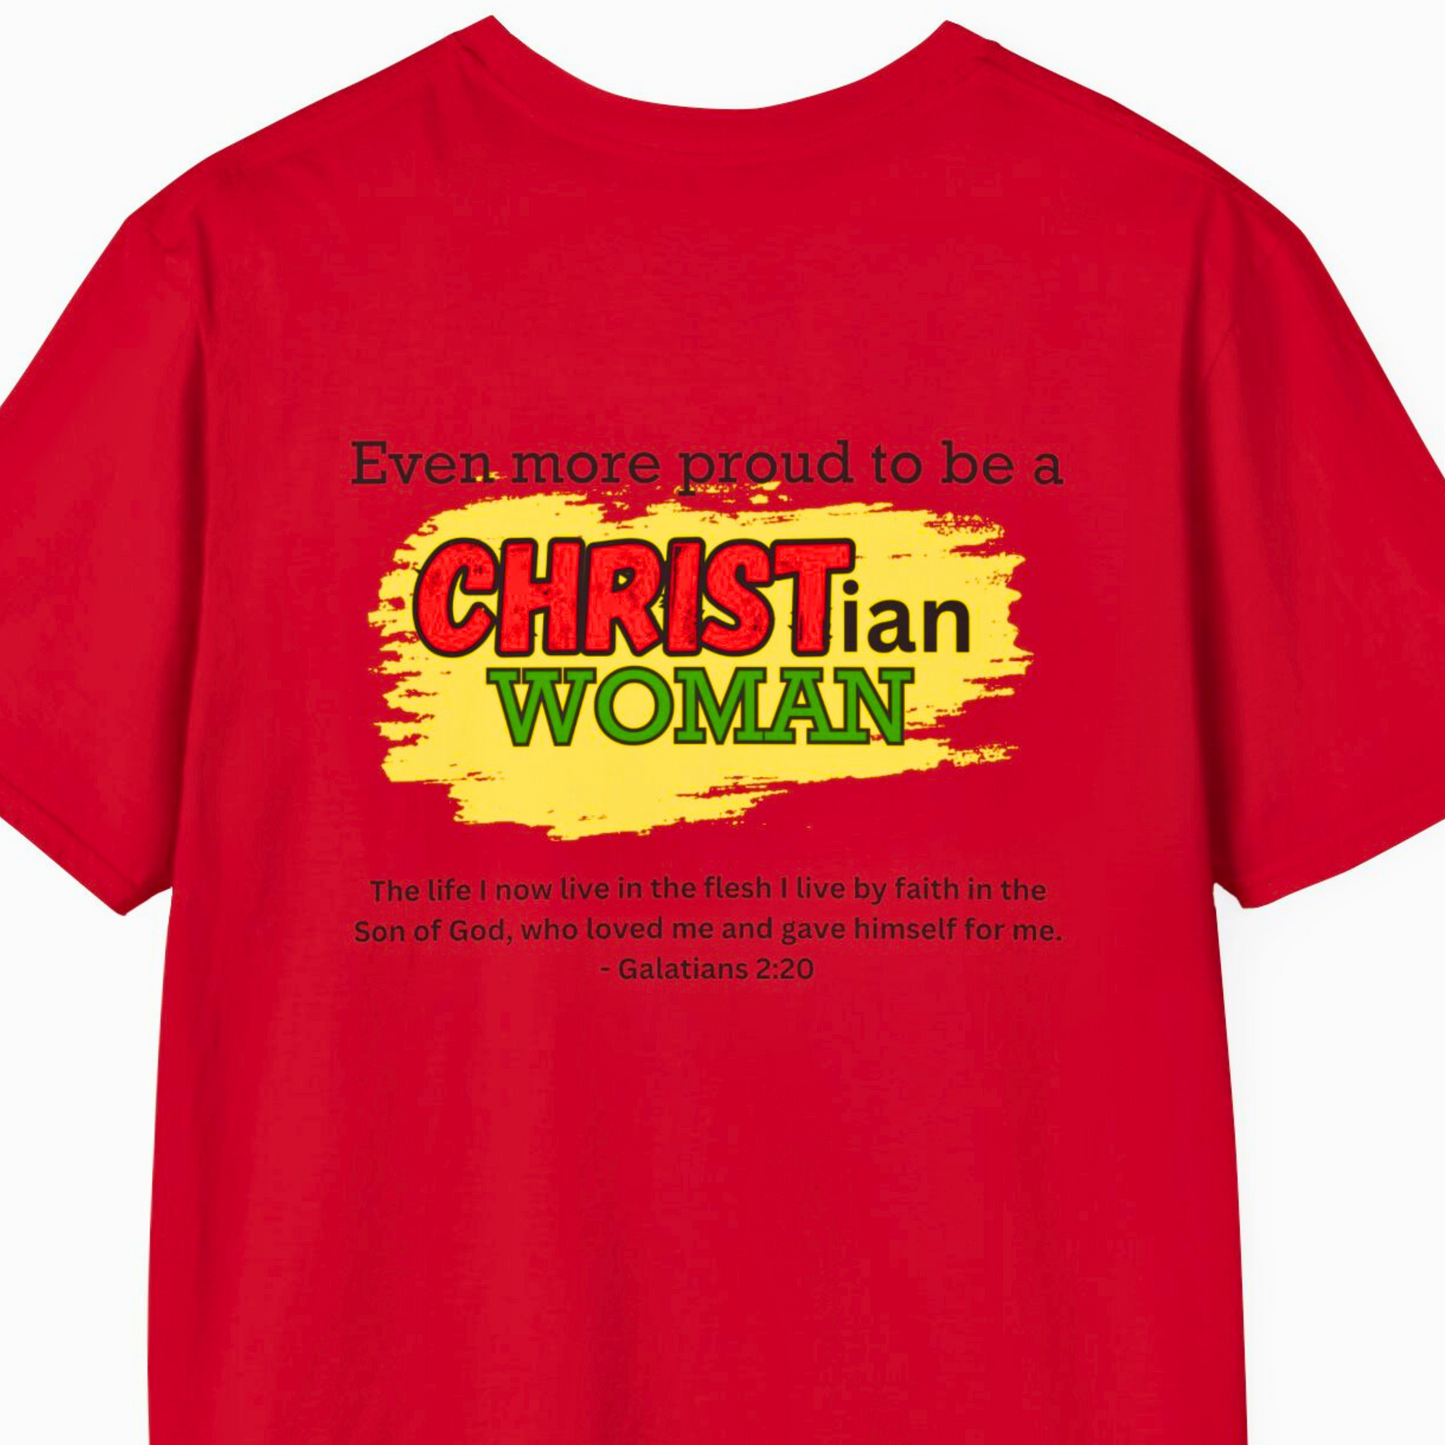 Get the empowering Red 'Proud to be a Black Christian Woman' T-shirt - Faith Fashion from Triumph Tees. This stylish tee celebrates faith and Black History, making a bold statement. Available in a range of sizes. Order now and showcase your beliefs! #faithclothing #blackhistory